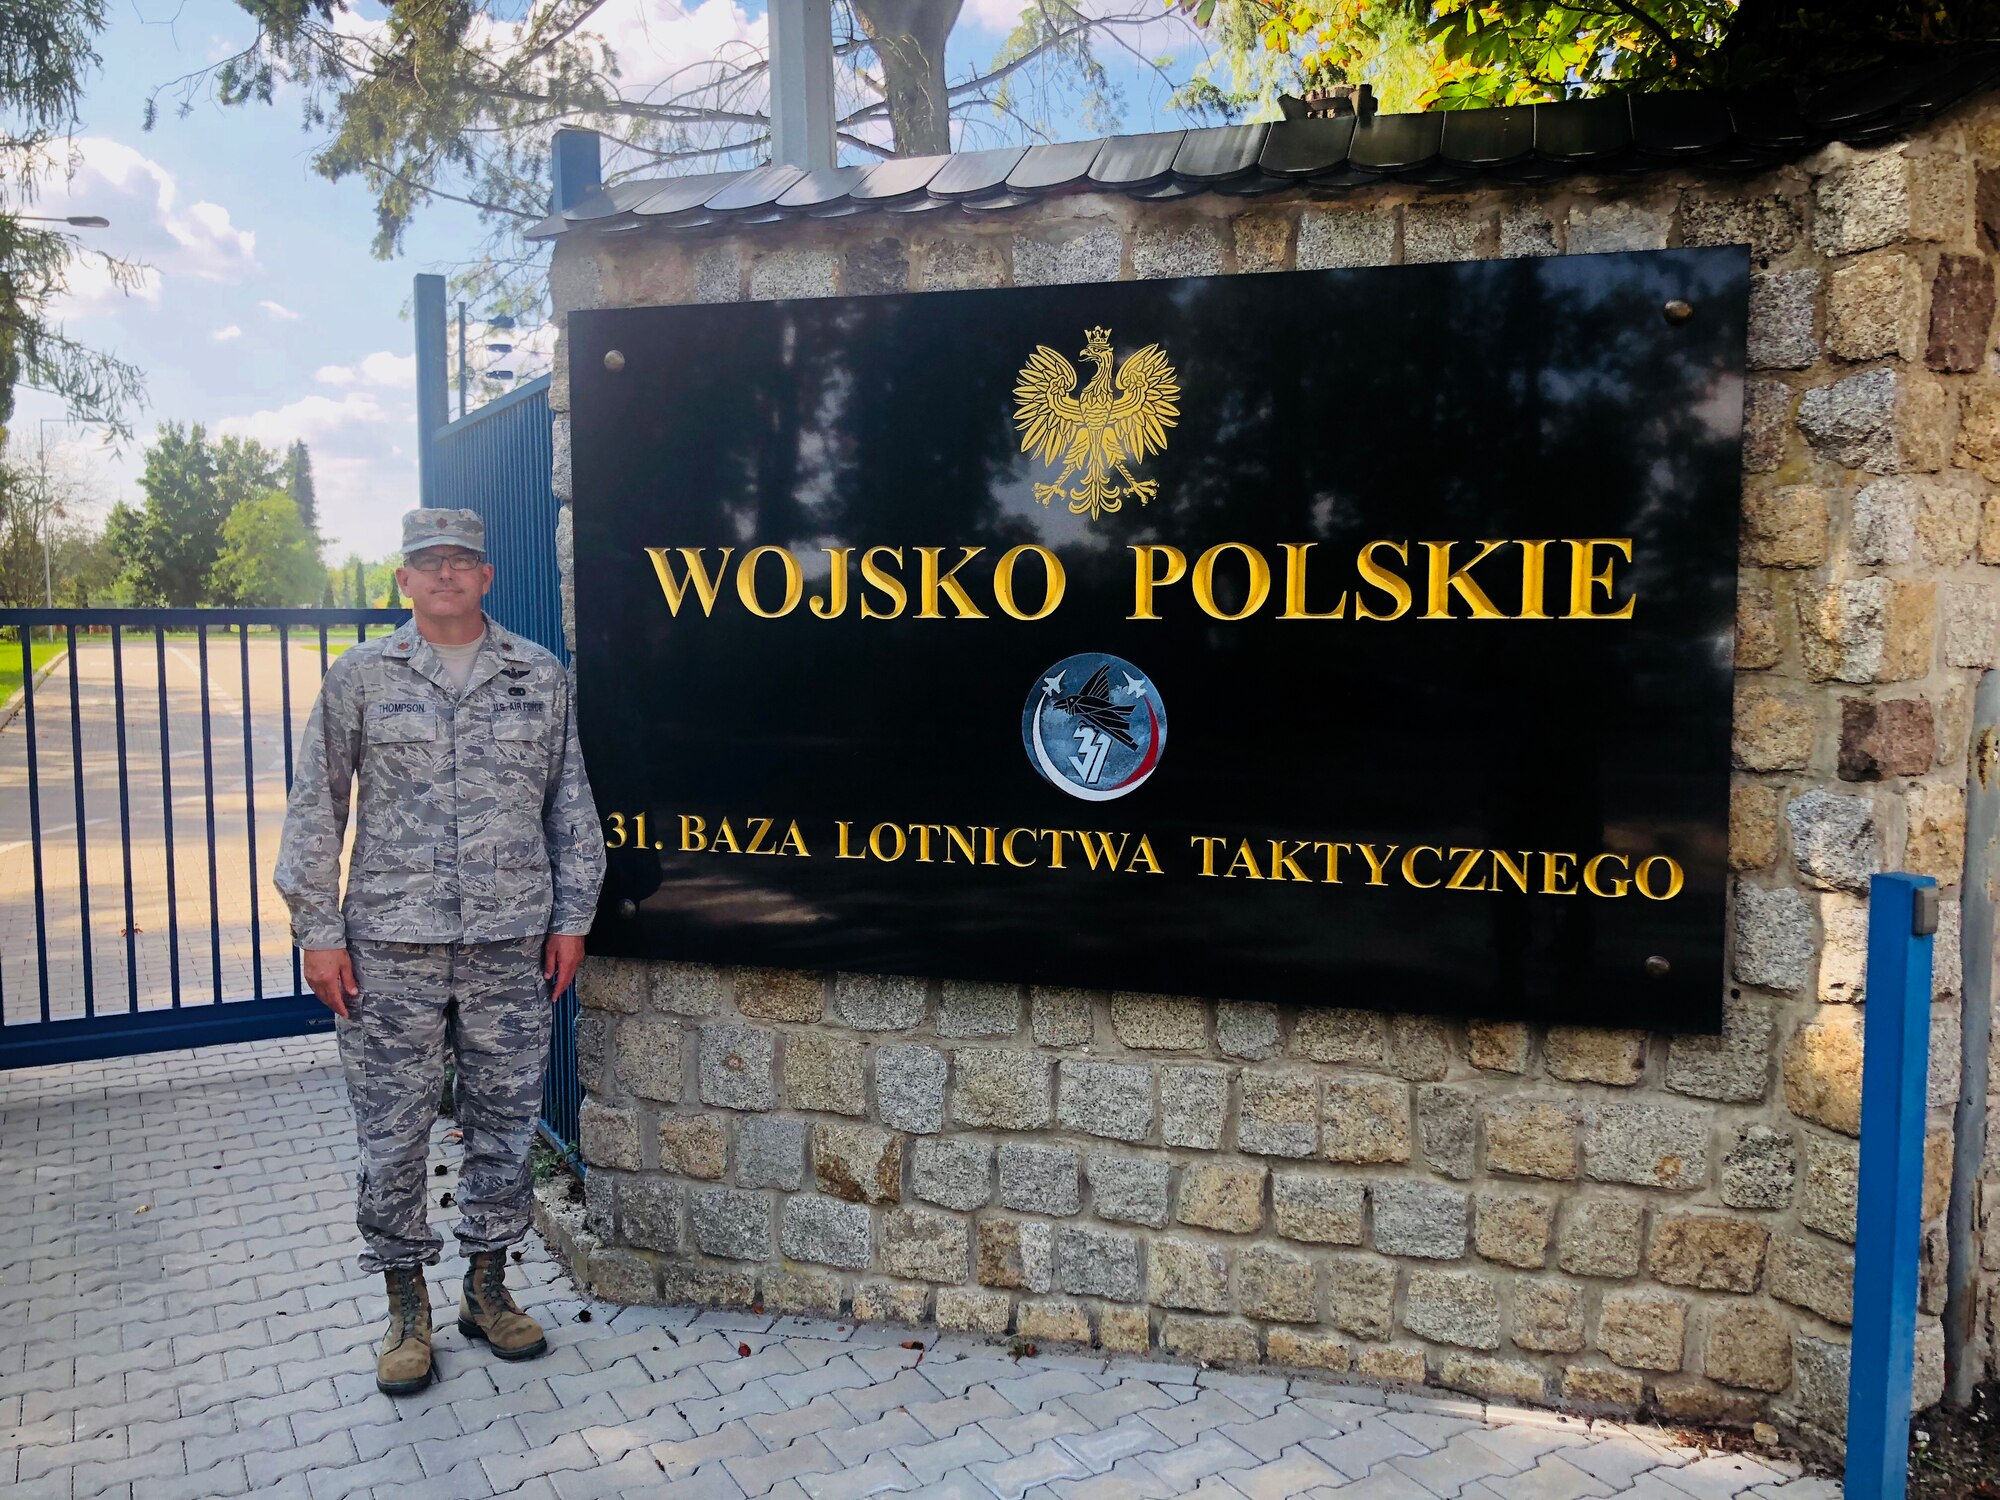 U.S. Air Force Maj. John C. Thompson, 145th Mission Support Group, poses in front of the 31st Tactical Air Base sign during the Deployable Air Base System exercise in Poznan-Krzesiny, Poland, July 30, 2018. Major Thompson spent the majority of July and August in Poland as the exercise commander of the new Deployable Air Base System. It is new concept for the U.S. Air Force and enables the military to respond to potential contingency needs more rapidly.enables the military to respond to potential contingency needs more rapidly.